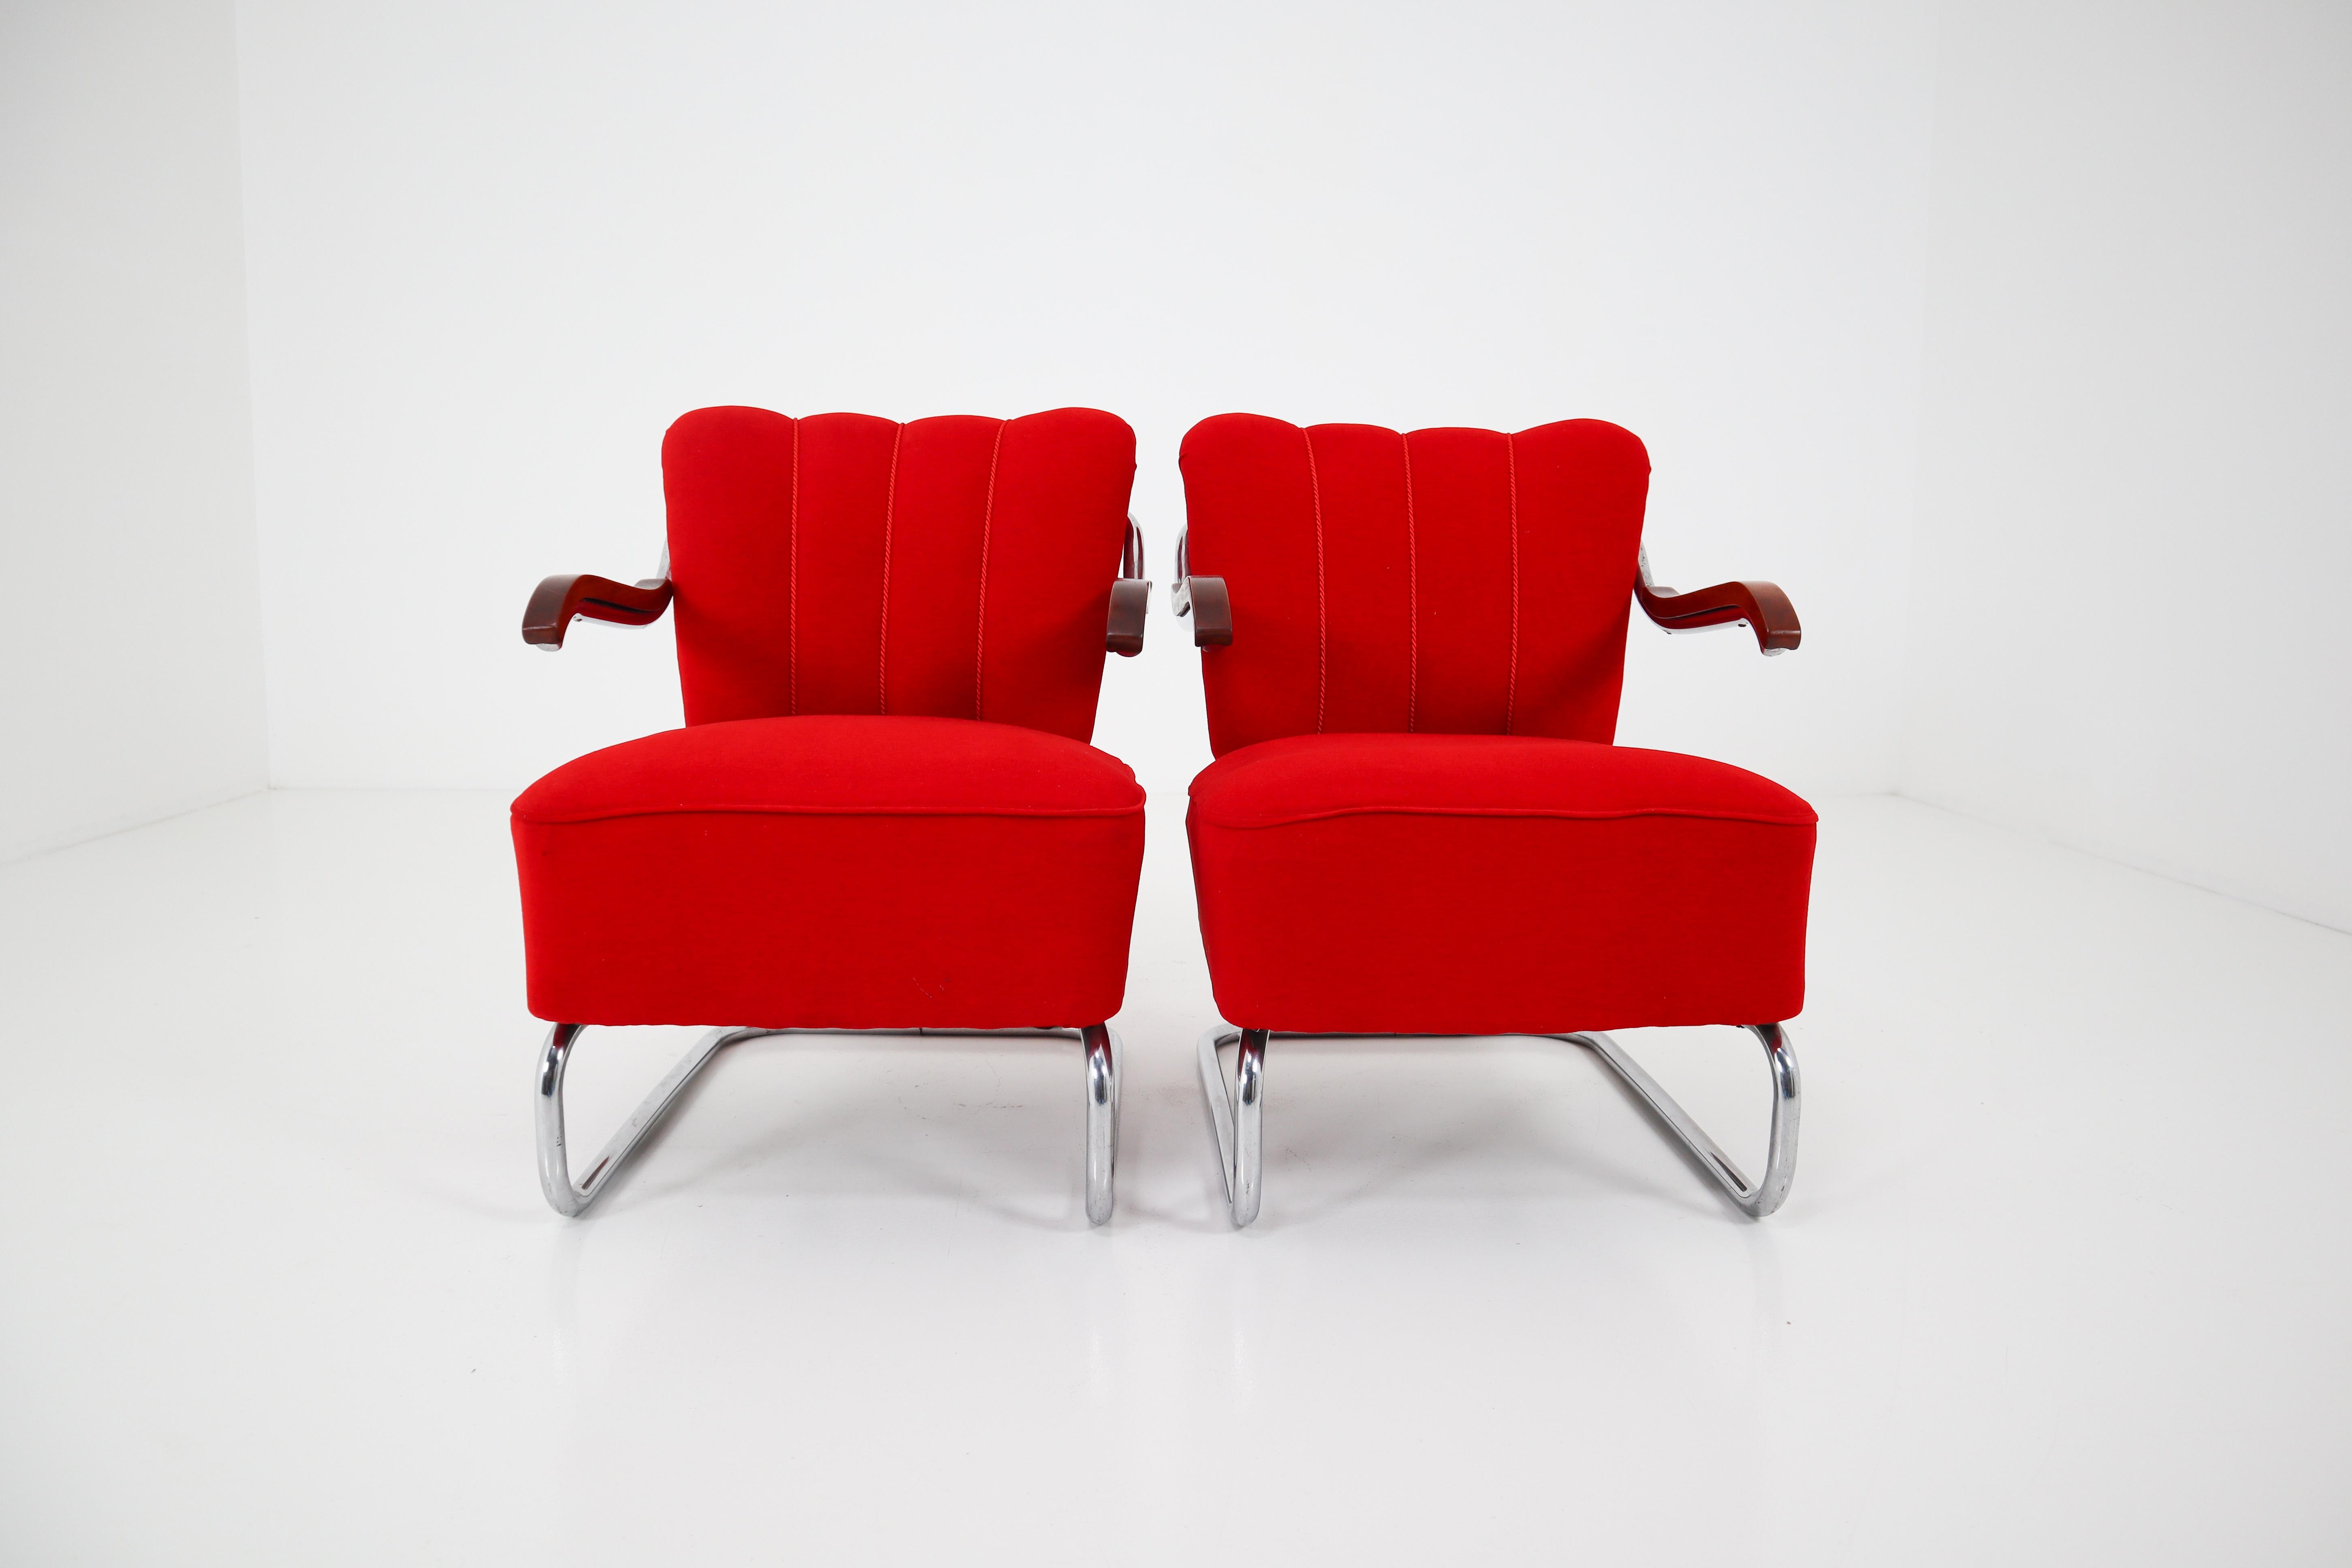 Armchairs by Thonet circa 1920s Midcentury Bauhaus Period in Red Fabric 2